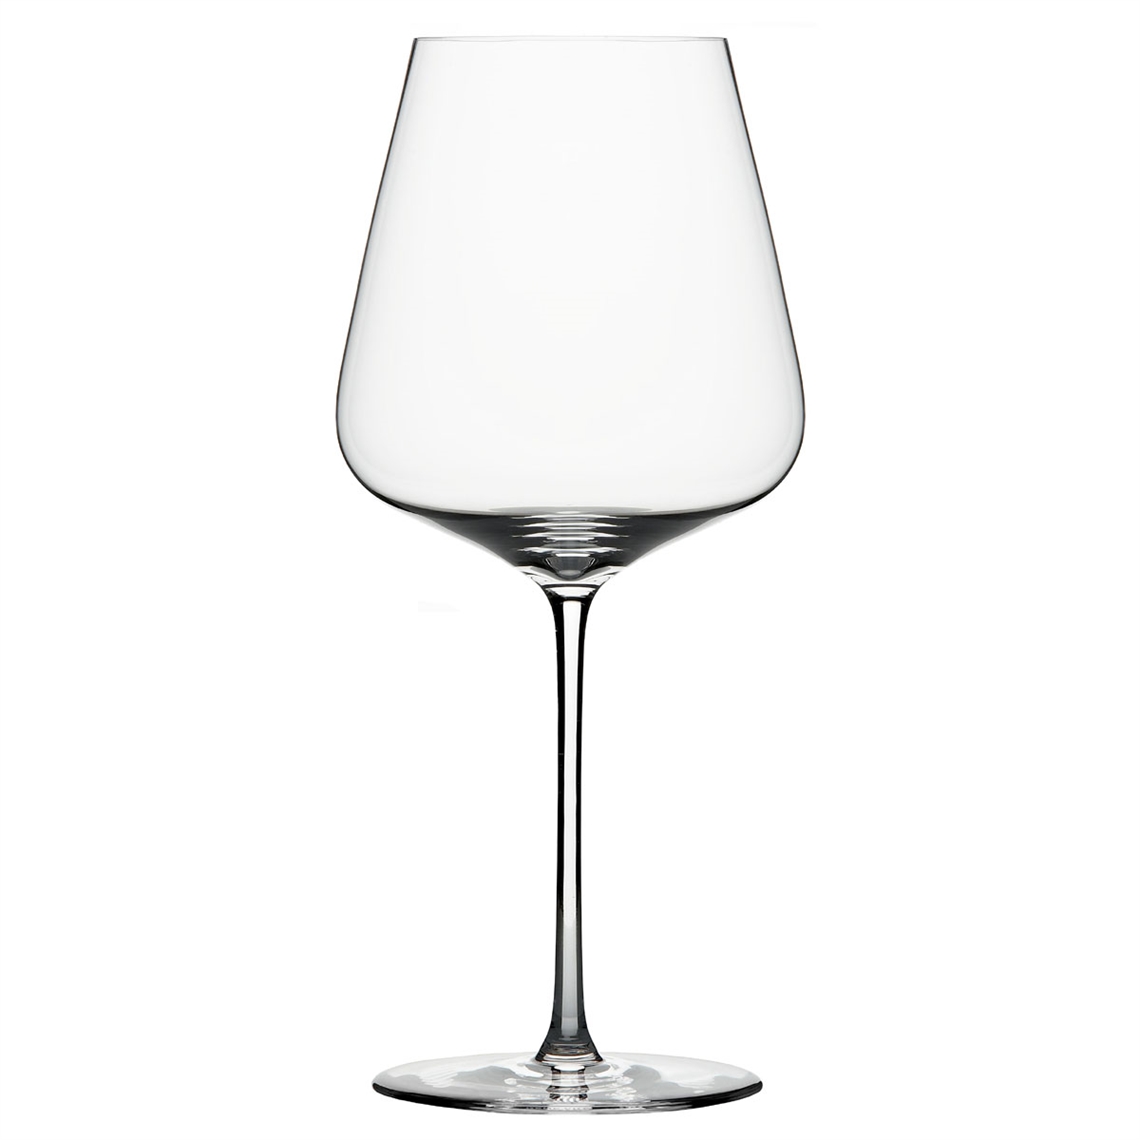 View more sydonios from our Premium Mouth Blown Glassware range